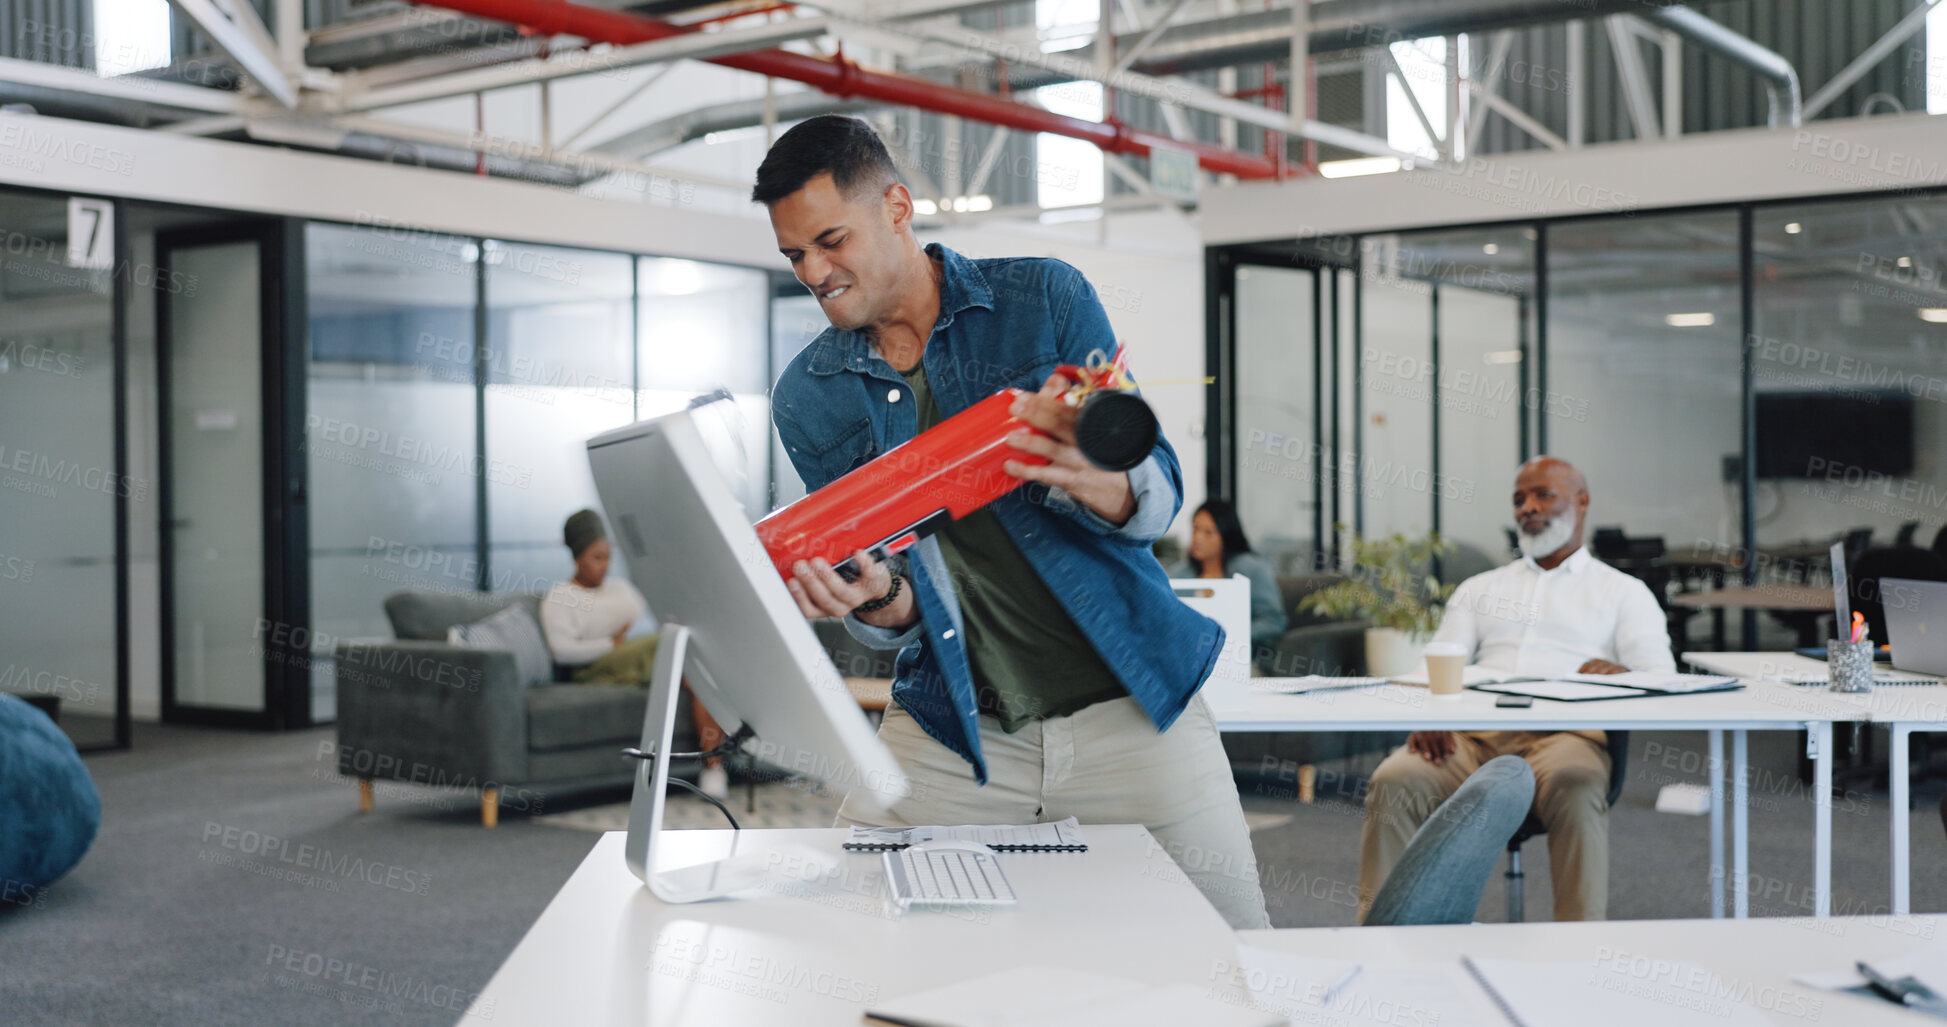 Buy stock photo Anger, frustrated and fire extinguisher with a businessman breaking a computer with breakdown at work. Mental health, tantrum and professional angry male employee smashing a desktop in the office.